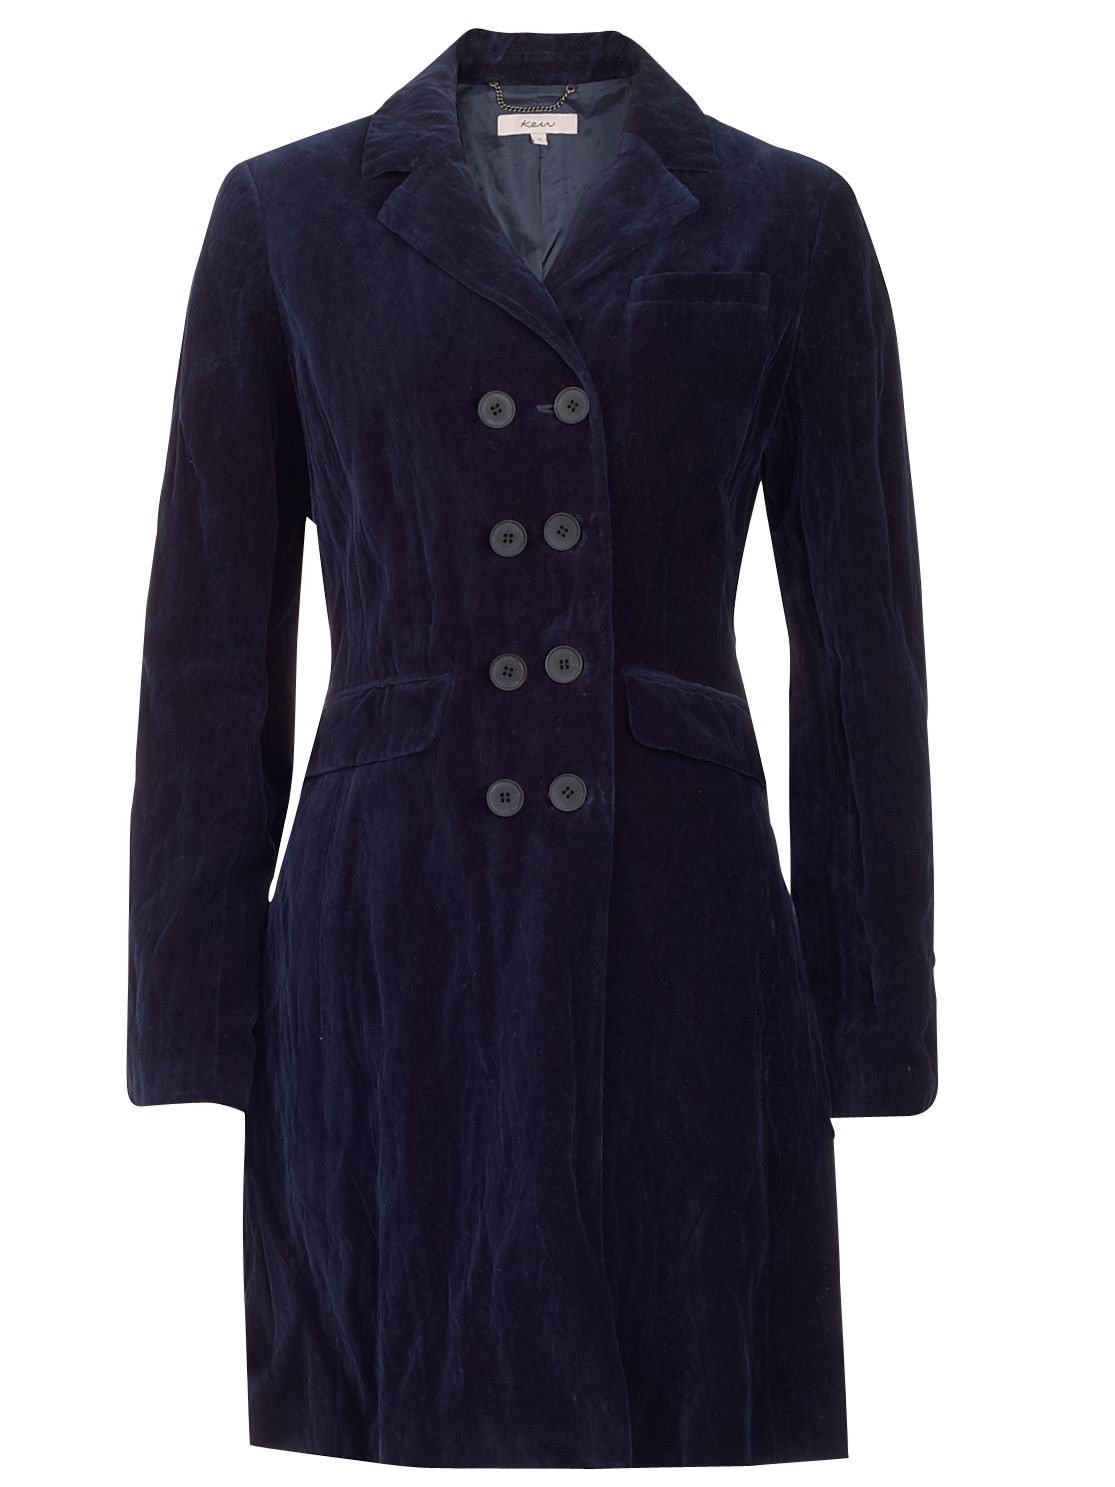 Kew Velvet Fitted Double Front Coat, Midnight at John Lewis